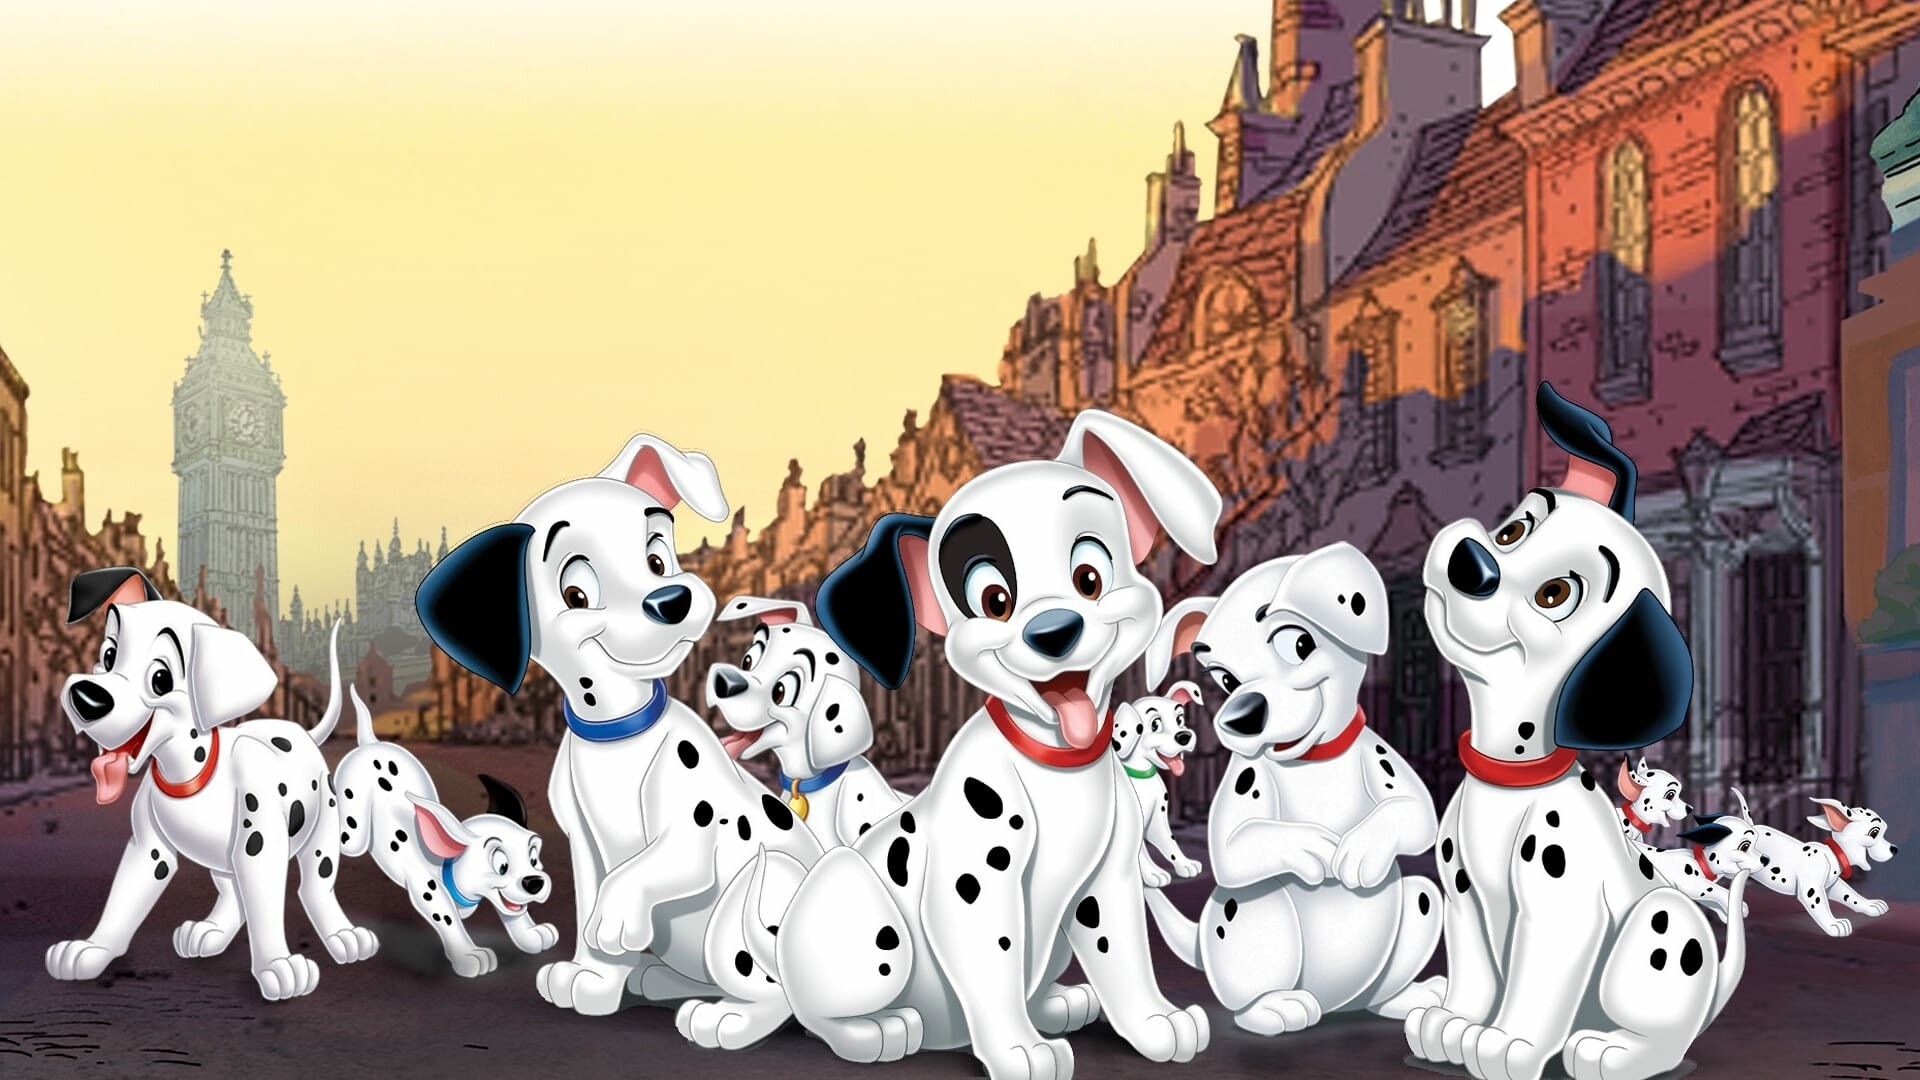 One Hundred and One Dalmatians: Disney's classic puppy tale, Dalmatian dogs. 1920x1080 Full HD Wallpaper.